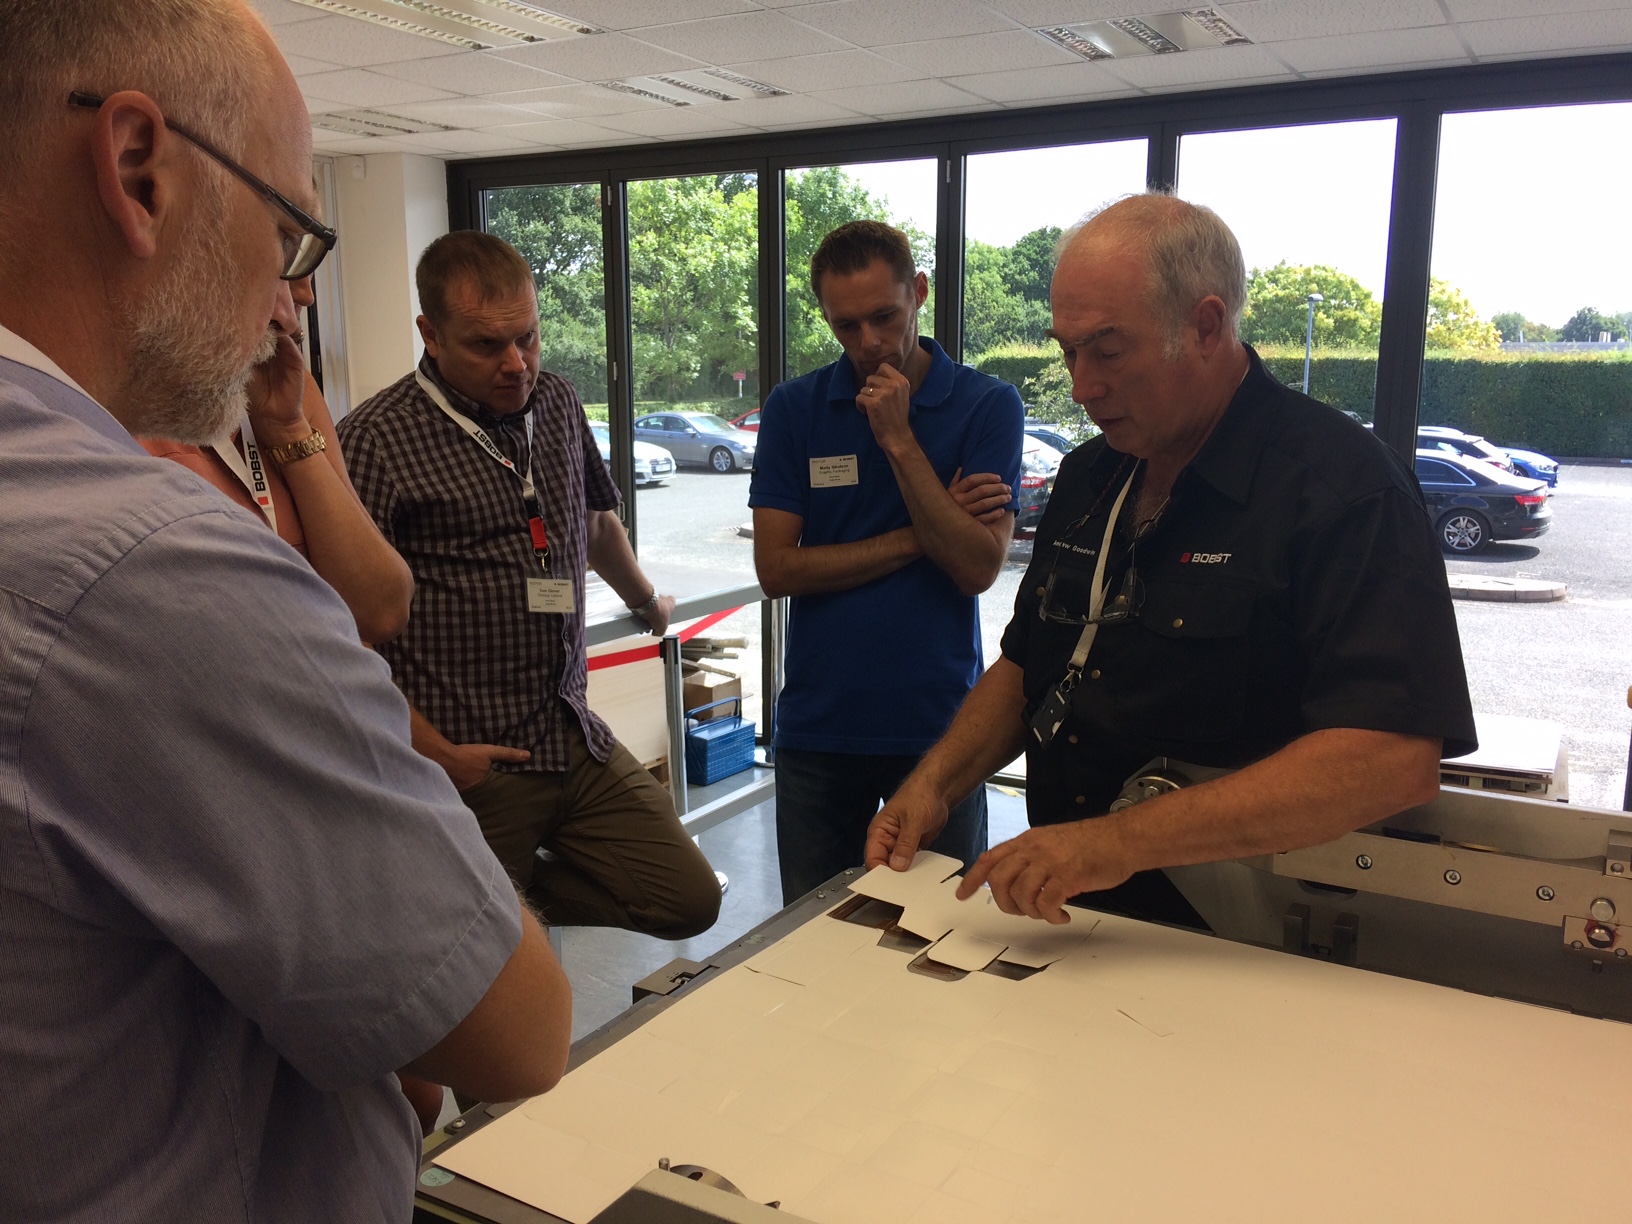 BOBST collaborates with BPIF Cartons to deliver hands-on training